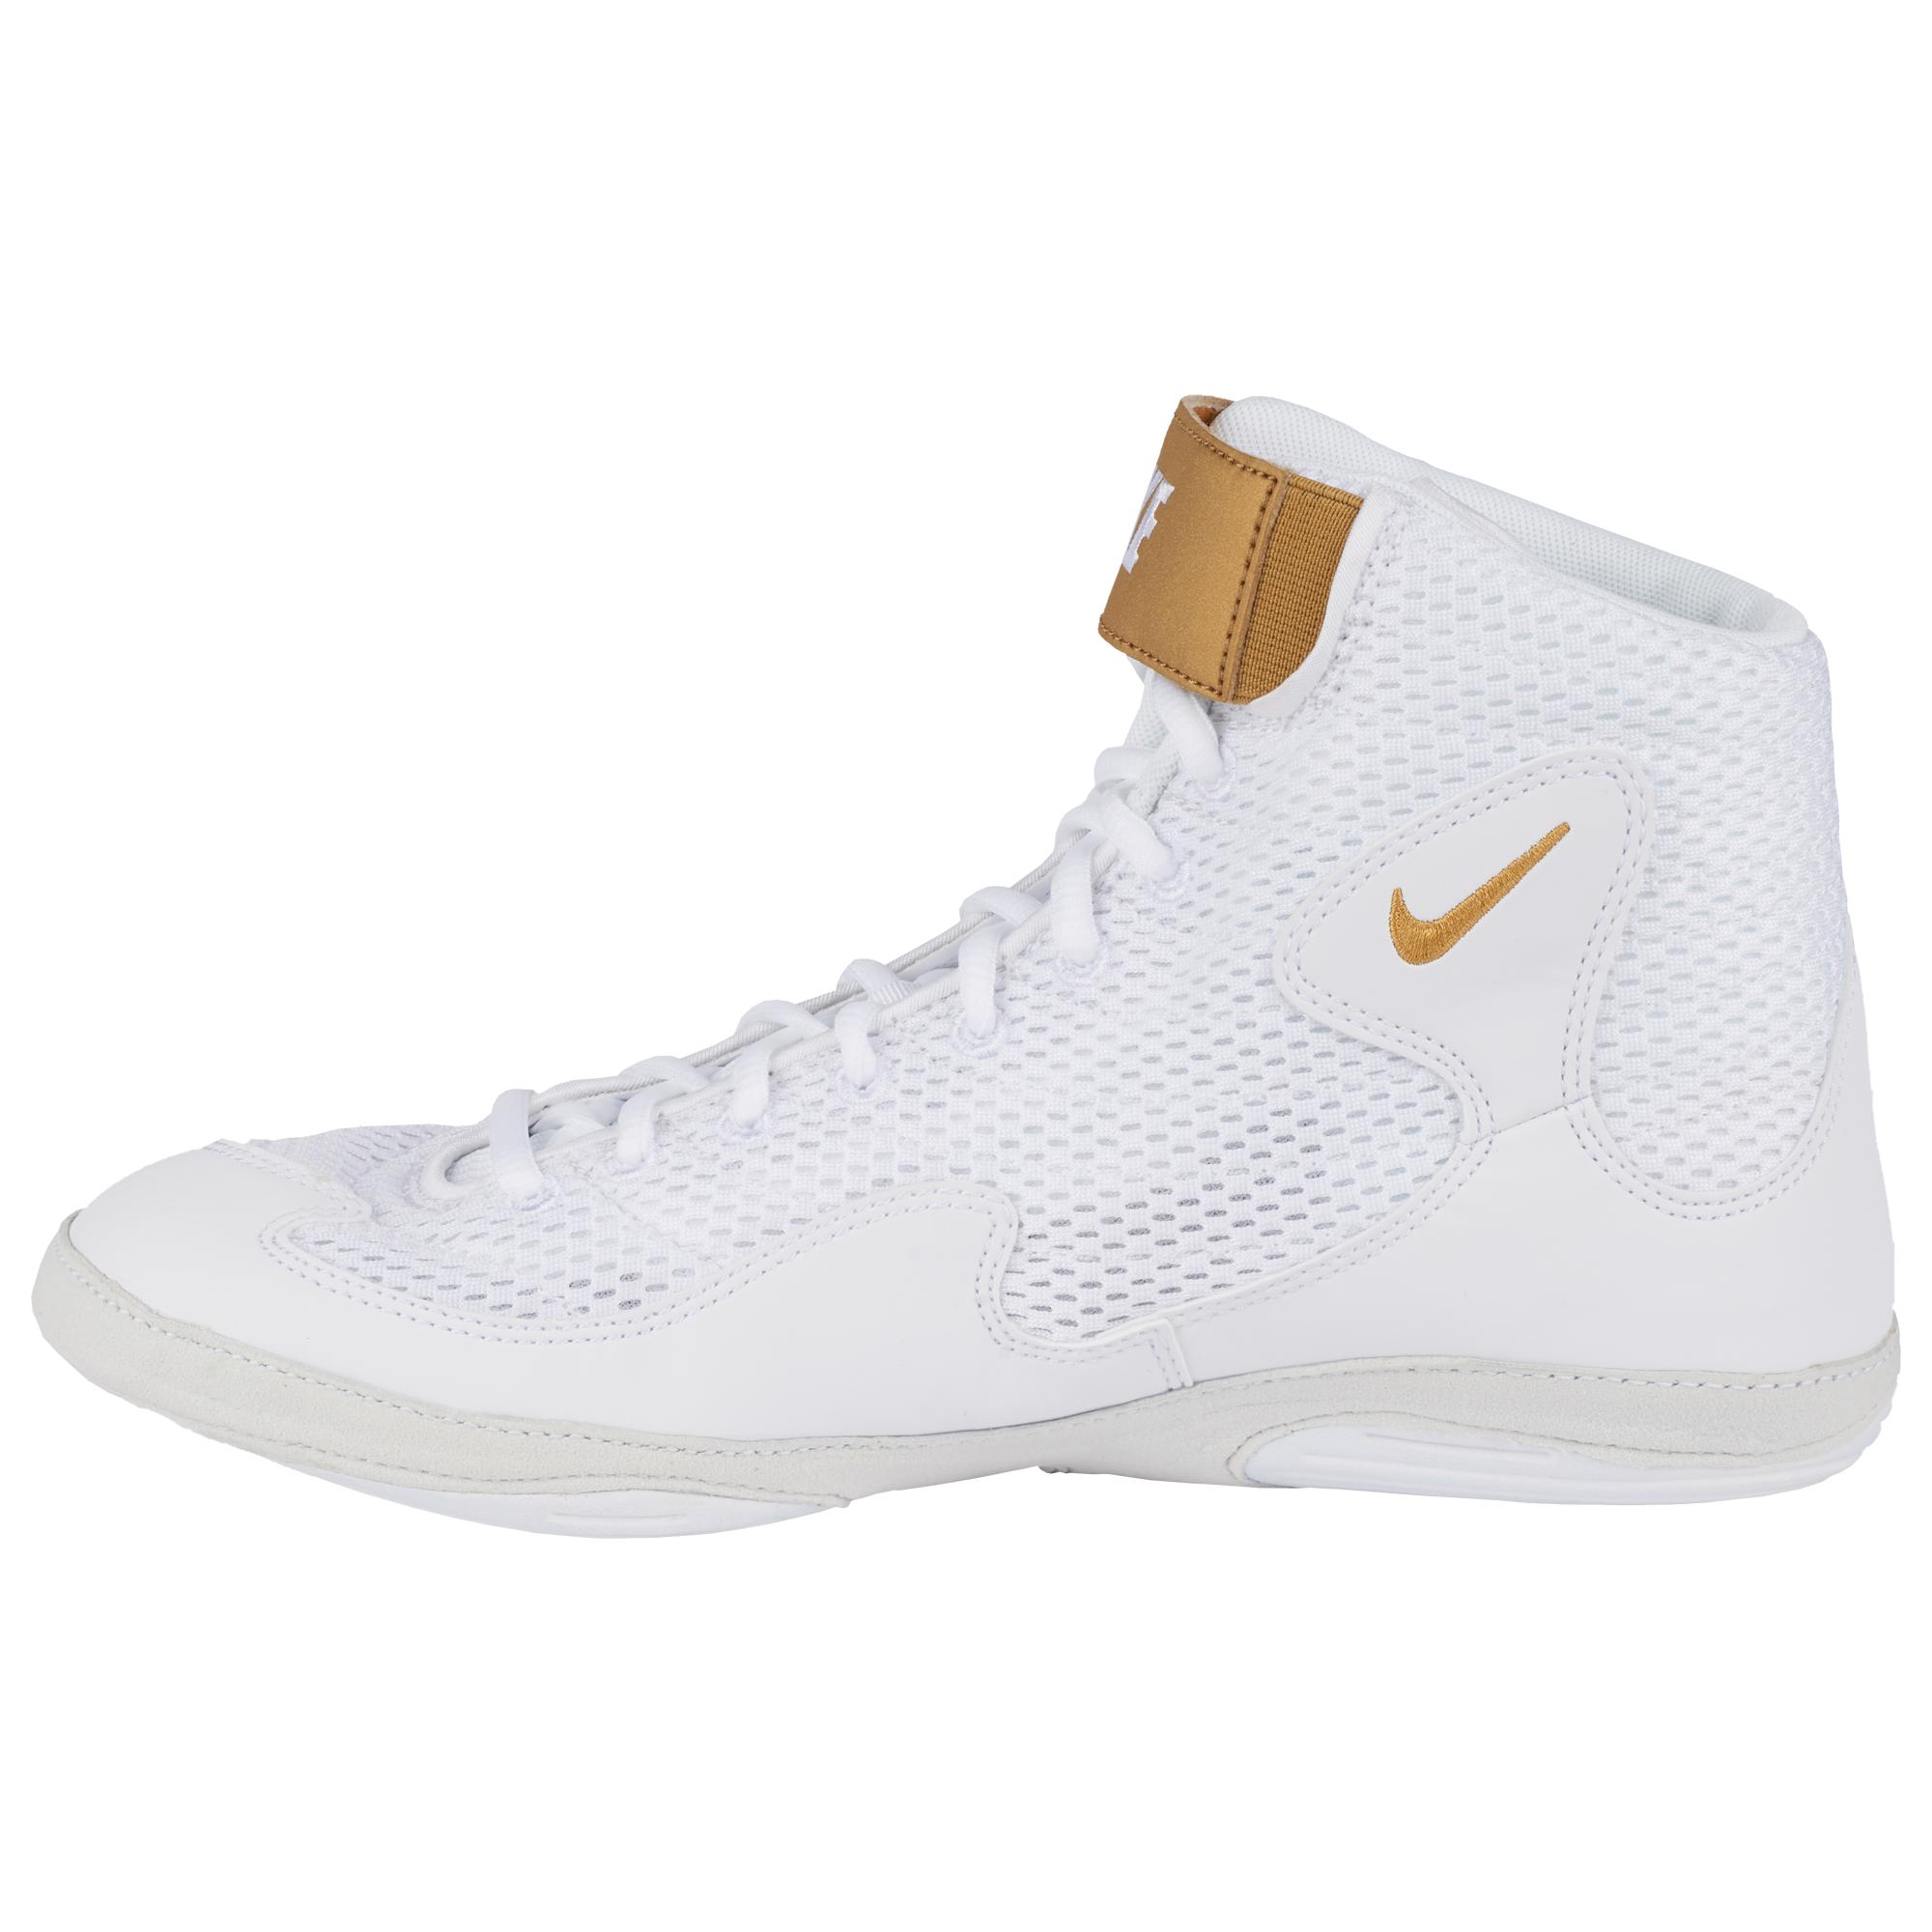 Nike Rubber Inflict 3 Wrestling Shoes in White Metallic Gold White  